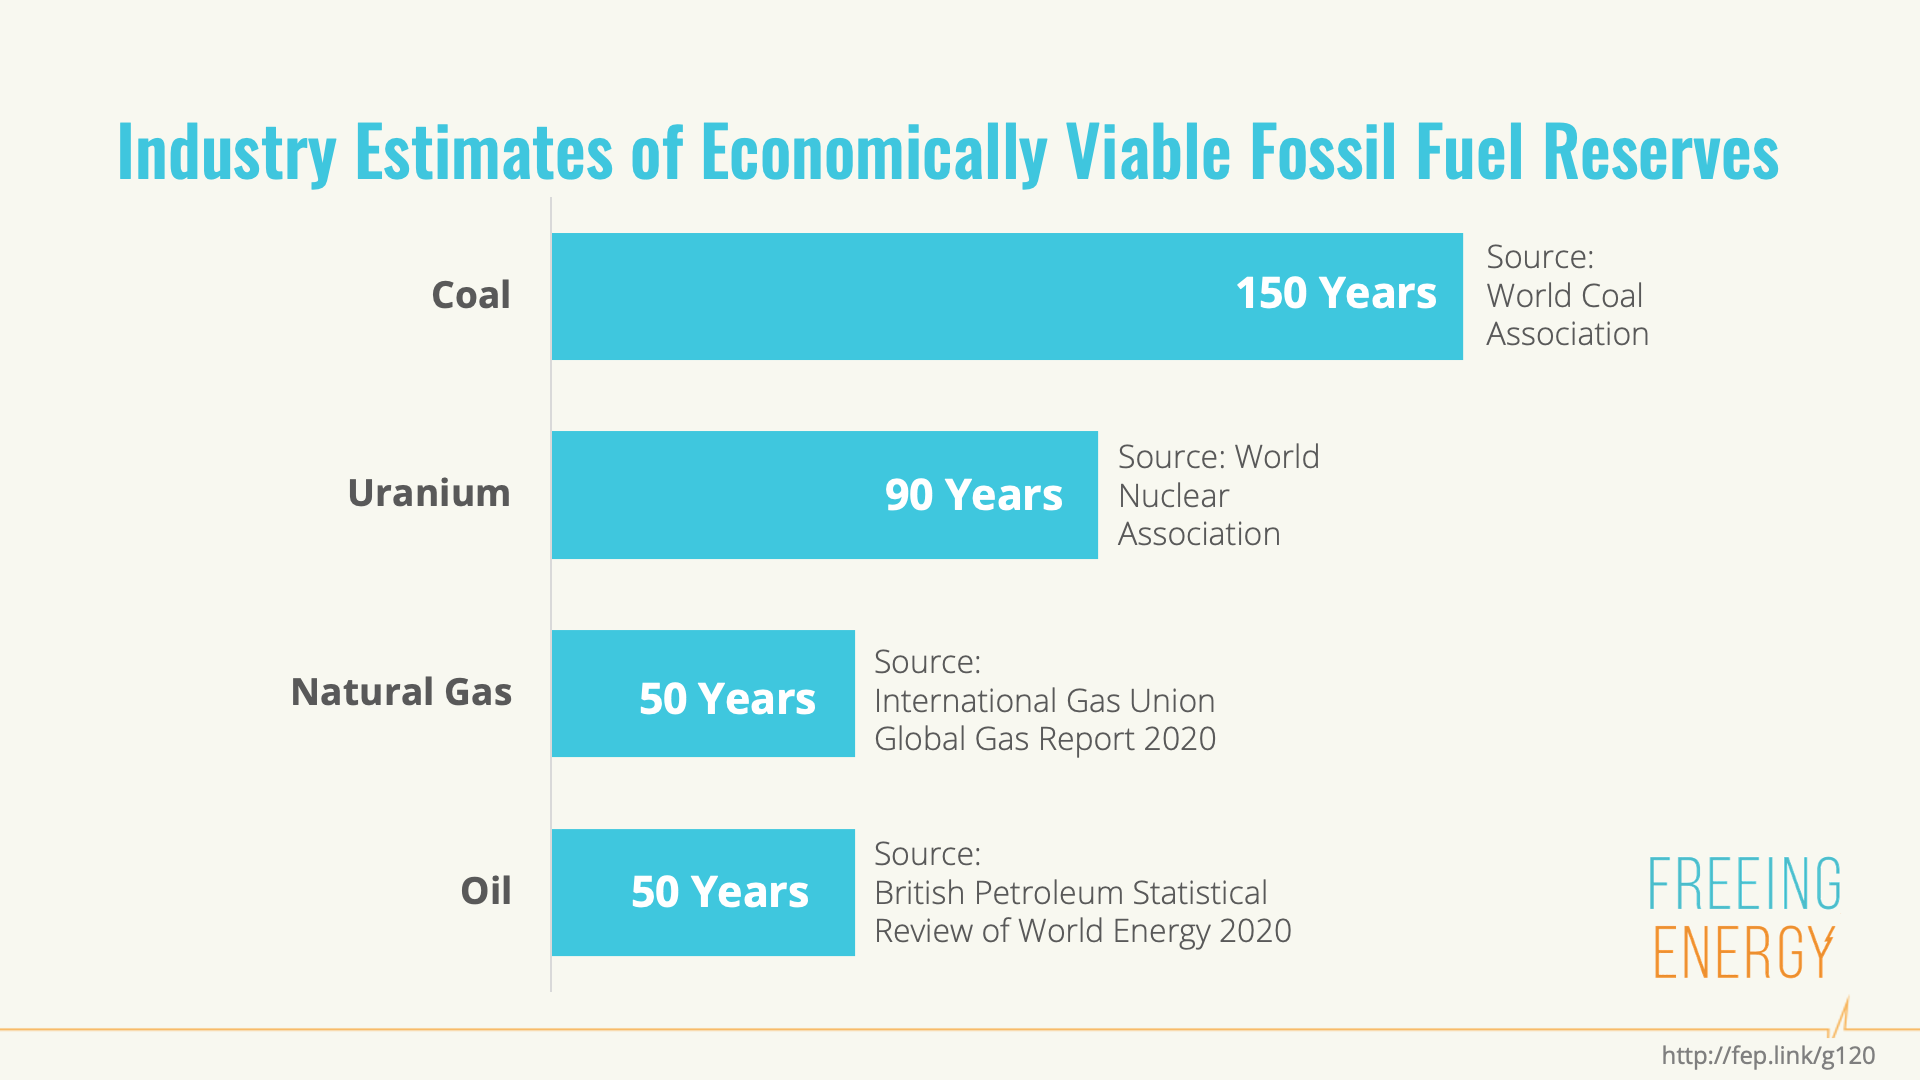 Fossil Fuel Reserves will not last more than 150 years